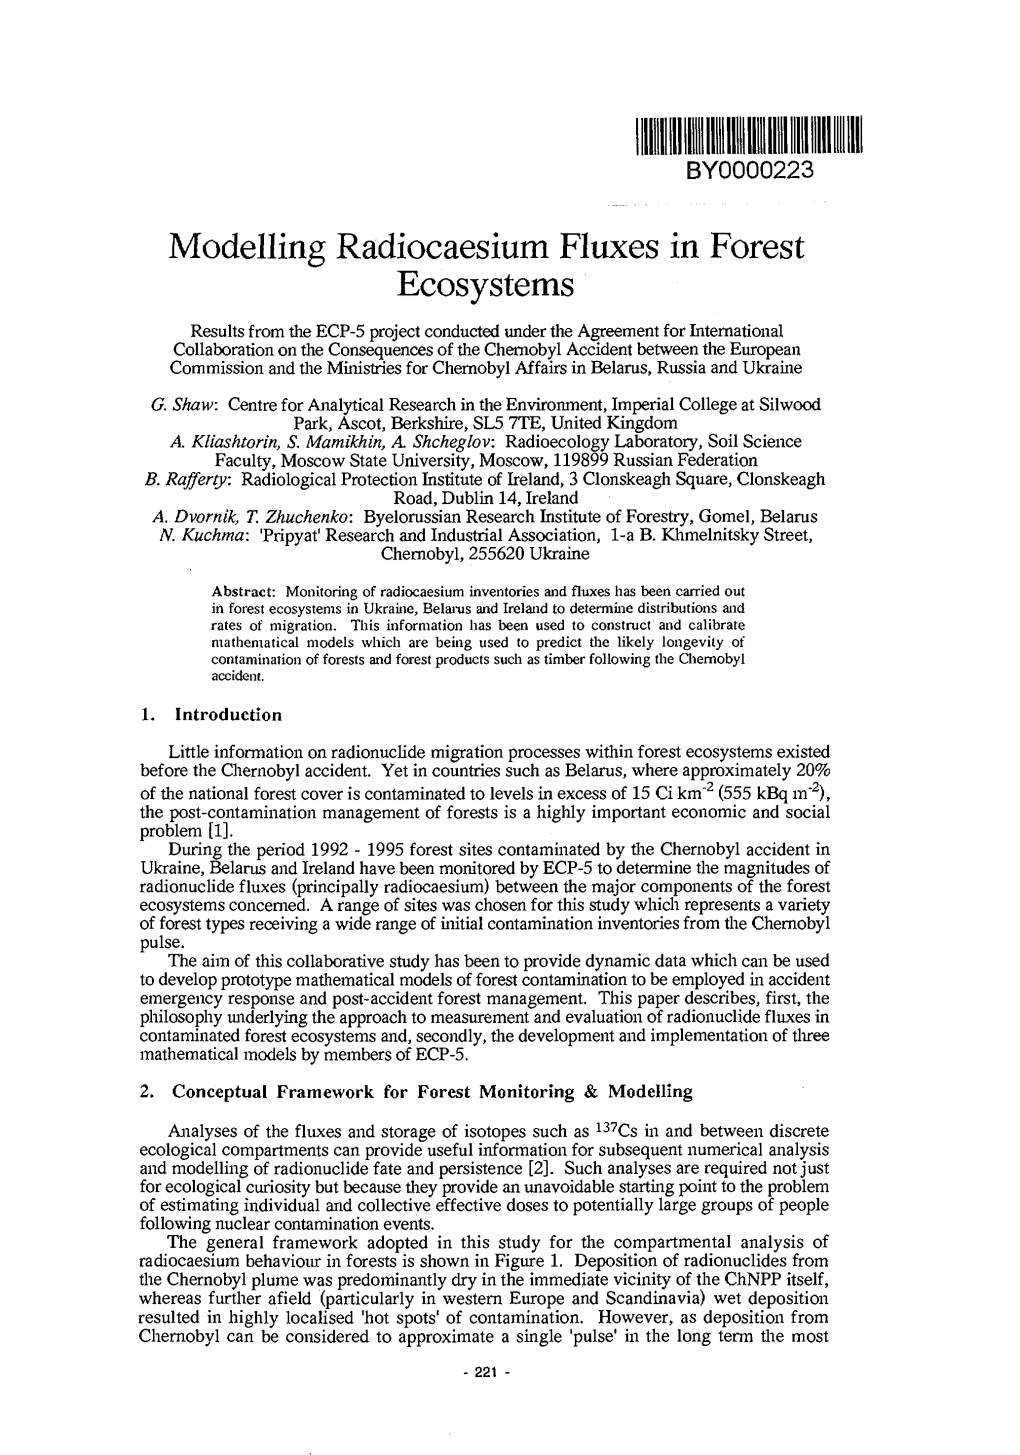 Modelling Radiocaesium Fluxes in Forest Ecosystems